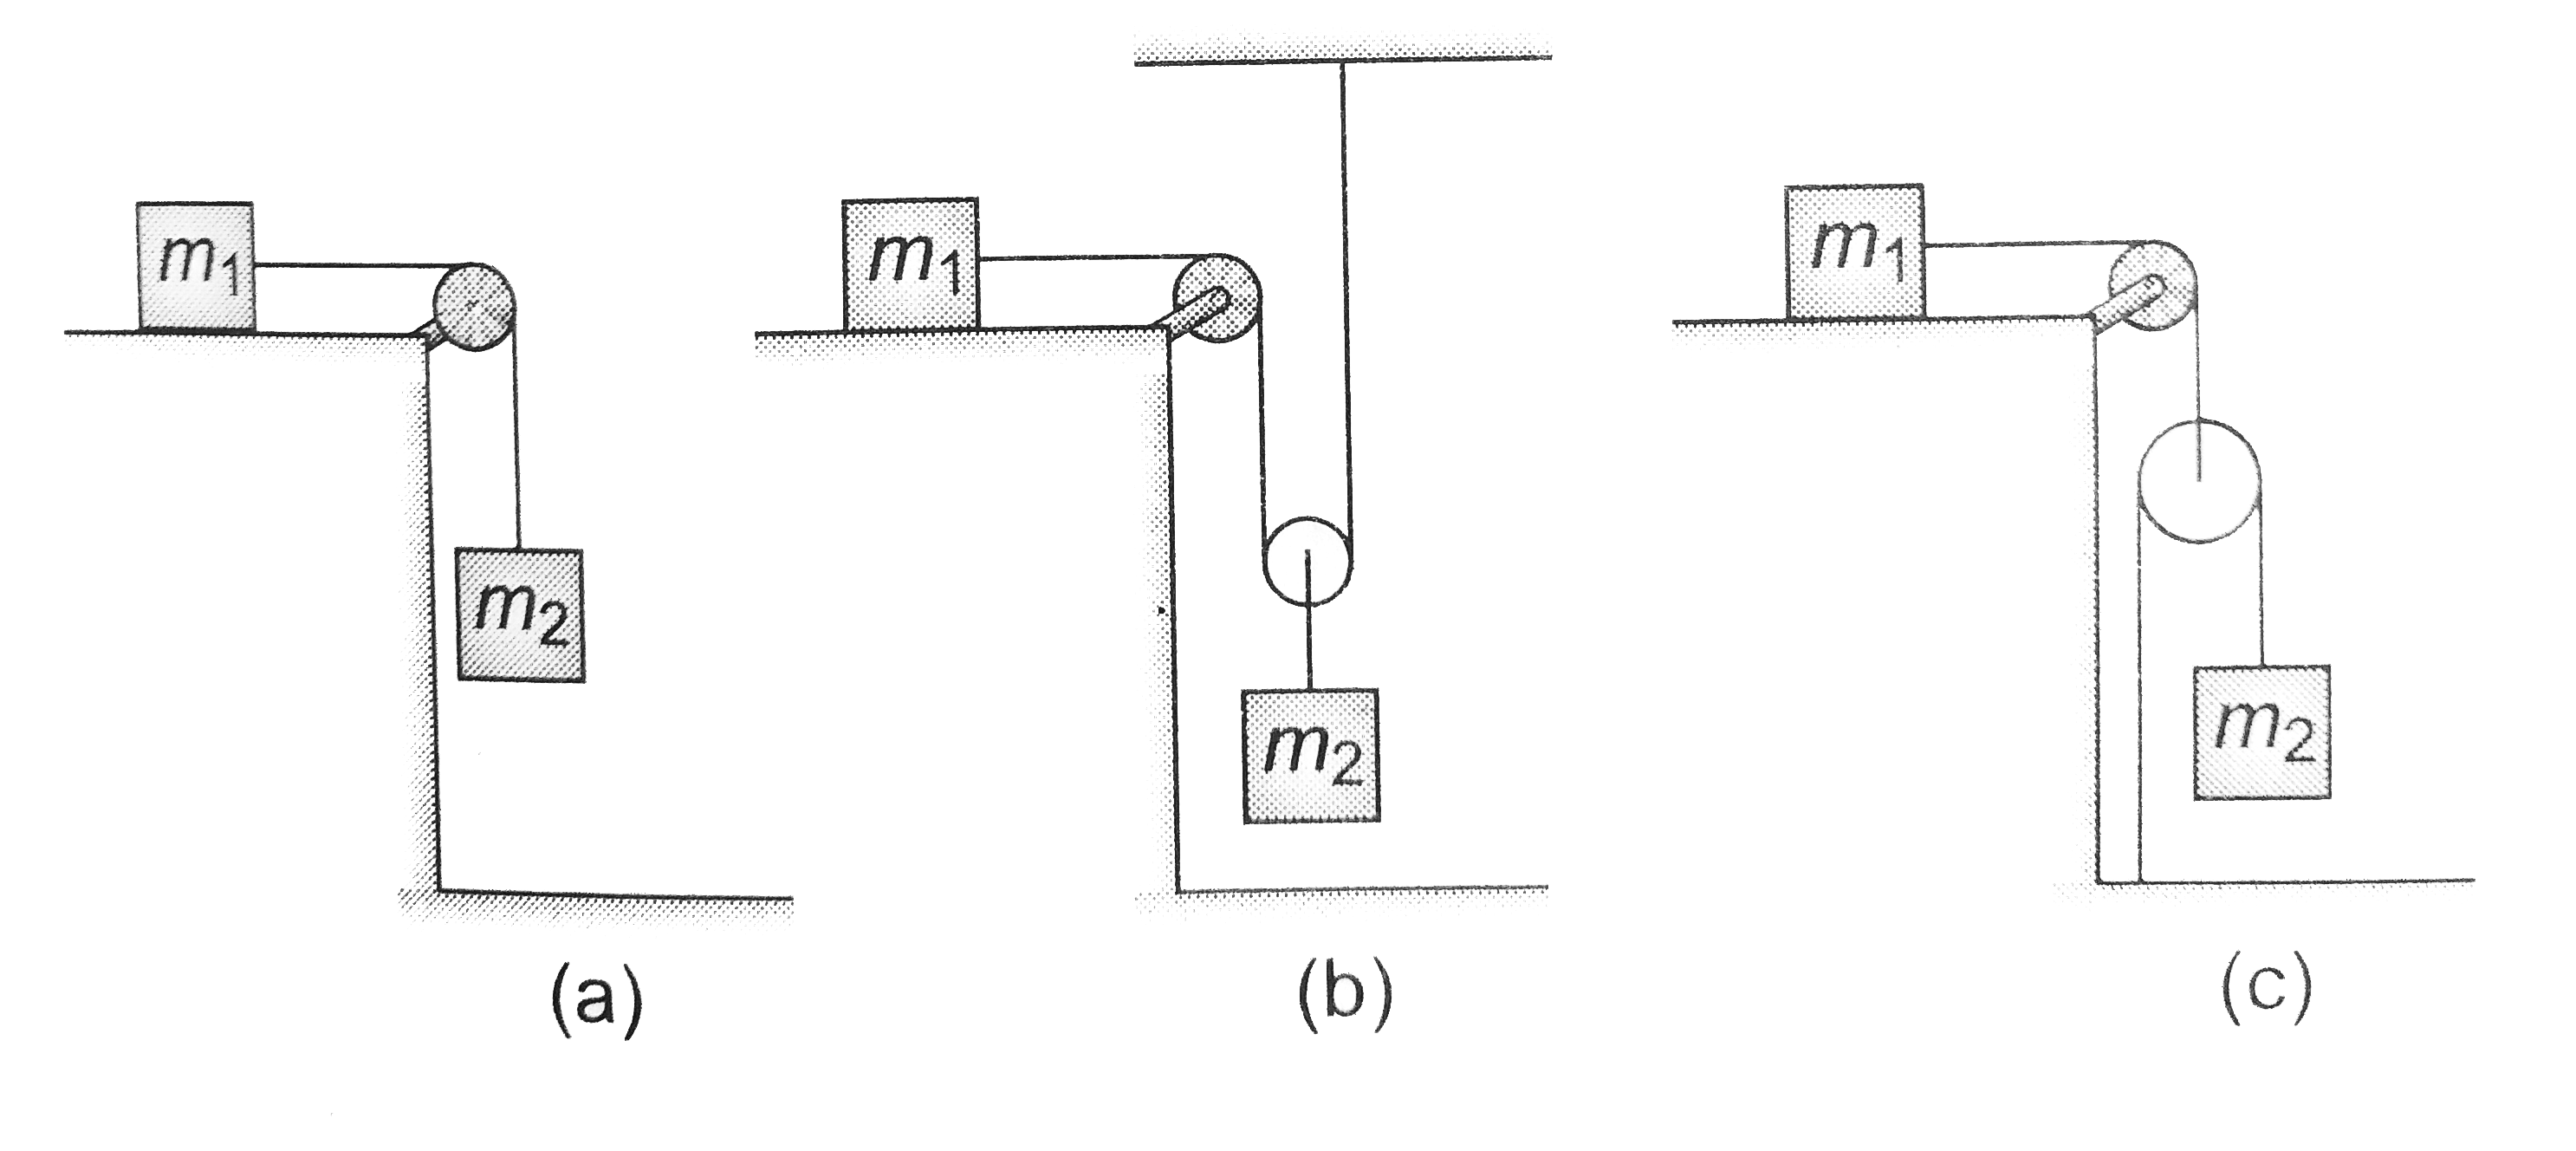 In each of the three arrangements, the block of mass m(1) is being pulled left with constant velocity. There is no friction anywhere. The string are light and anextensible and pulleys are massless. The ratio of the speed of the block of mass m(2) in the three cases respectively is: